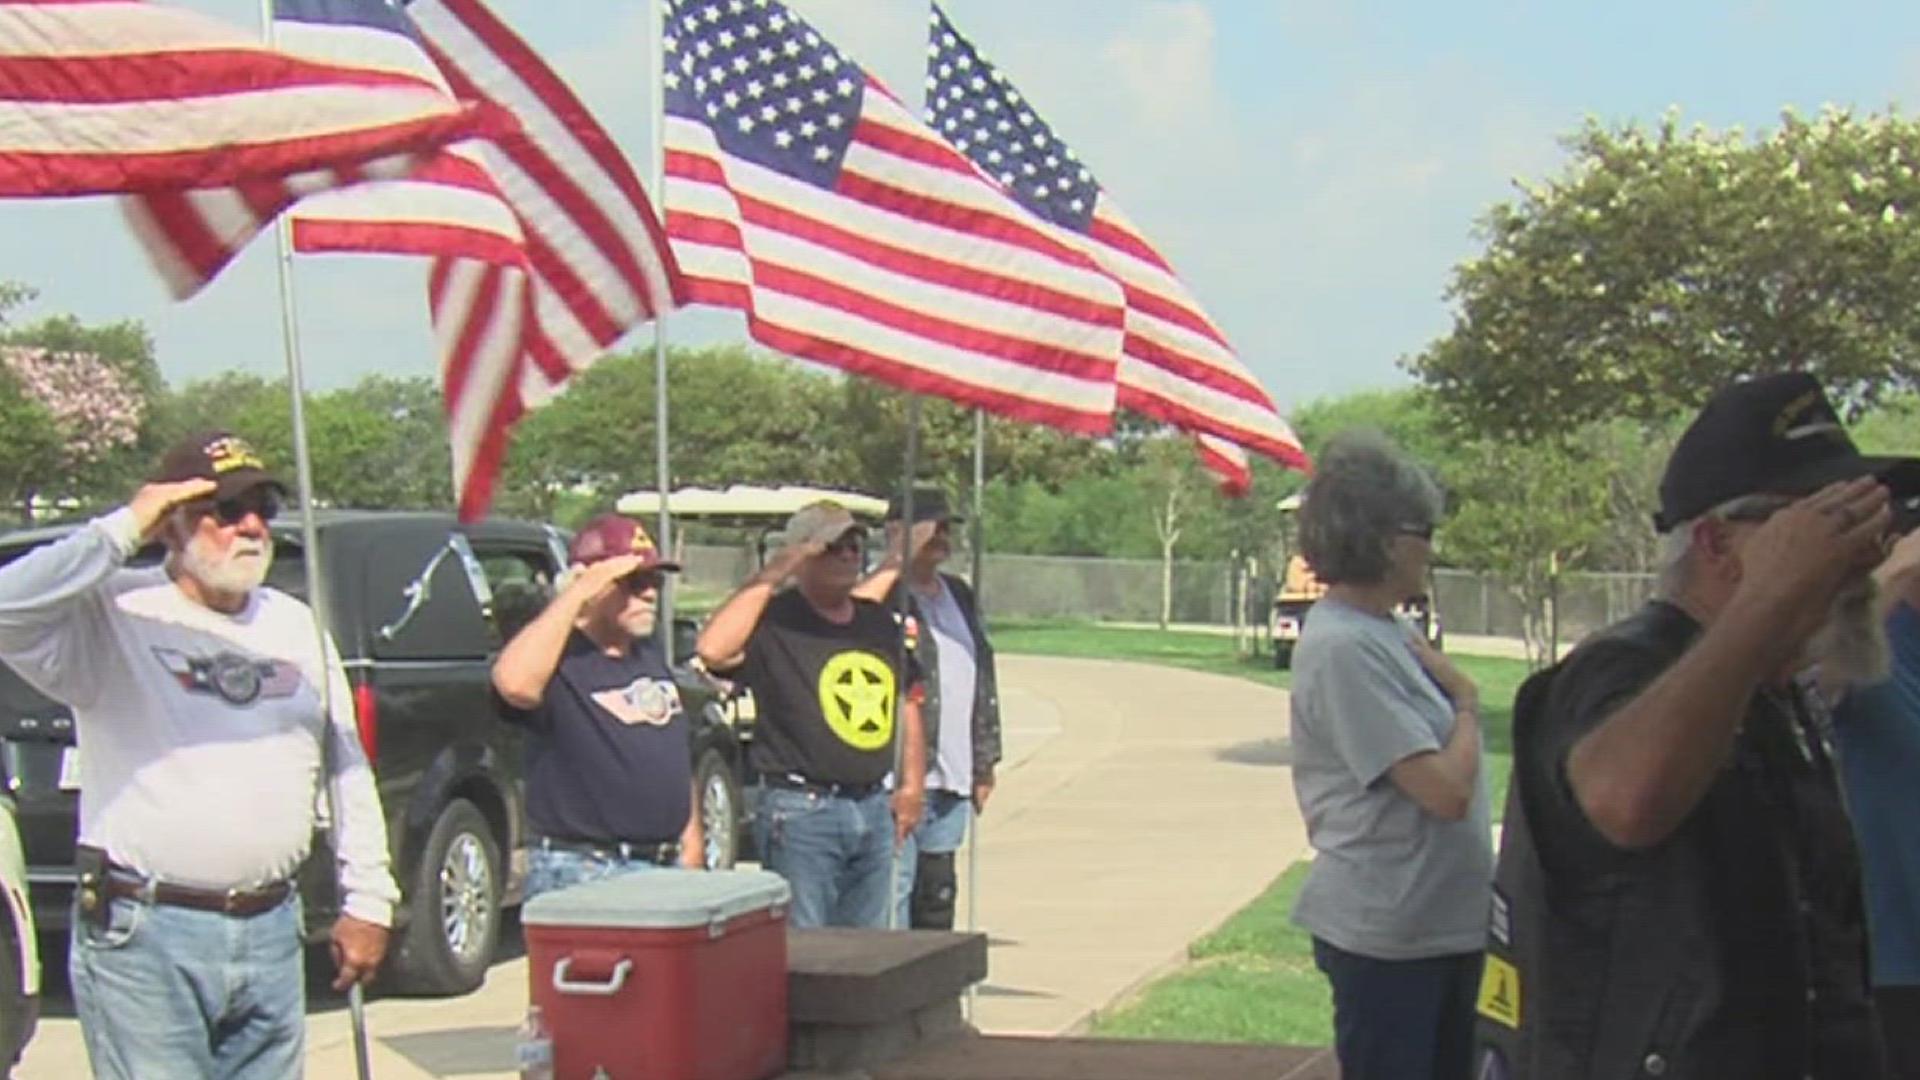 A burial for an unaccompanied veteran took place today. Sieglinde Juanita Shindler, was laid to rest at the Coastal Bend State Veterans Cemetery.